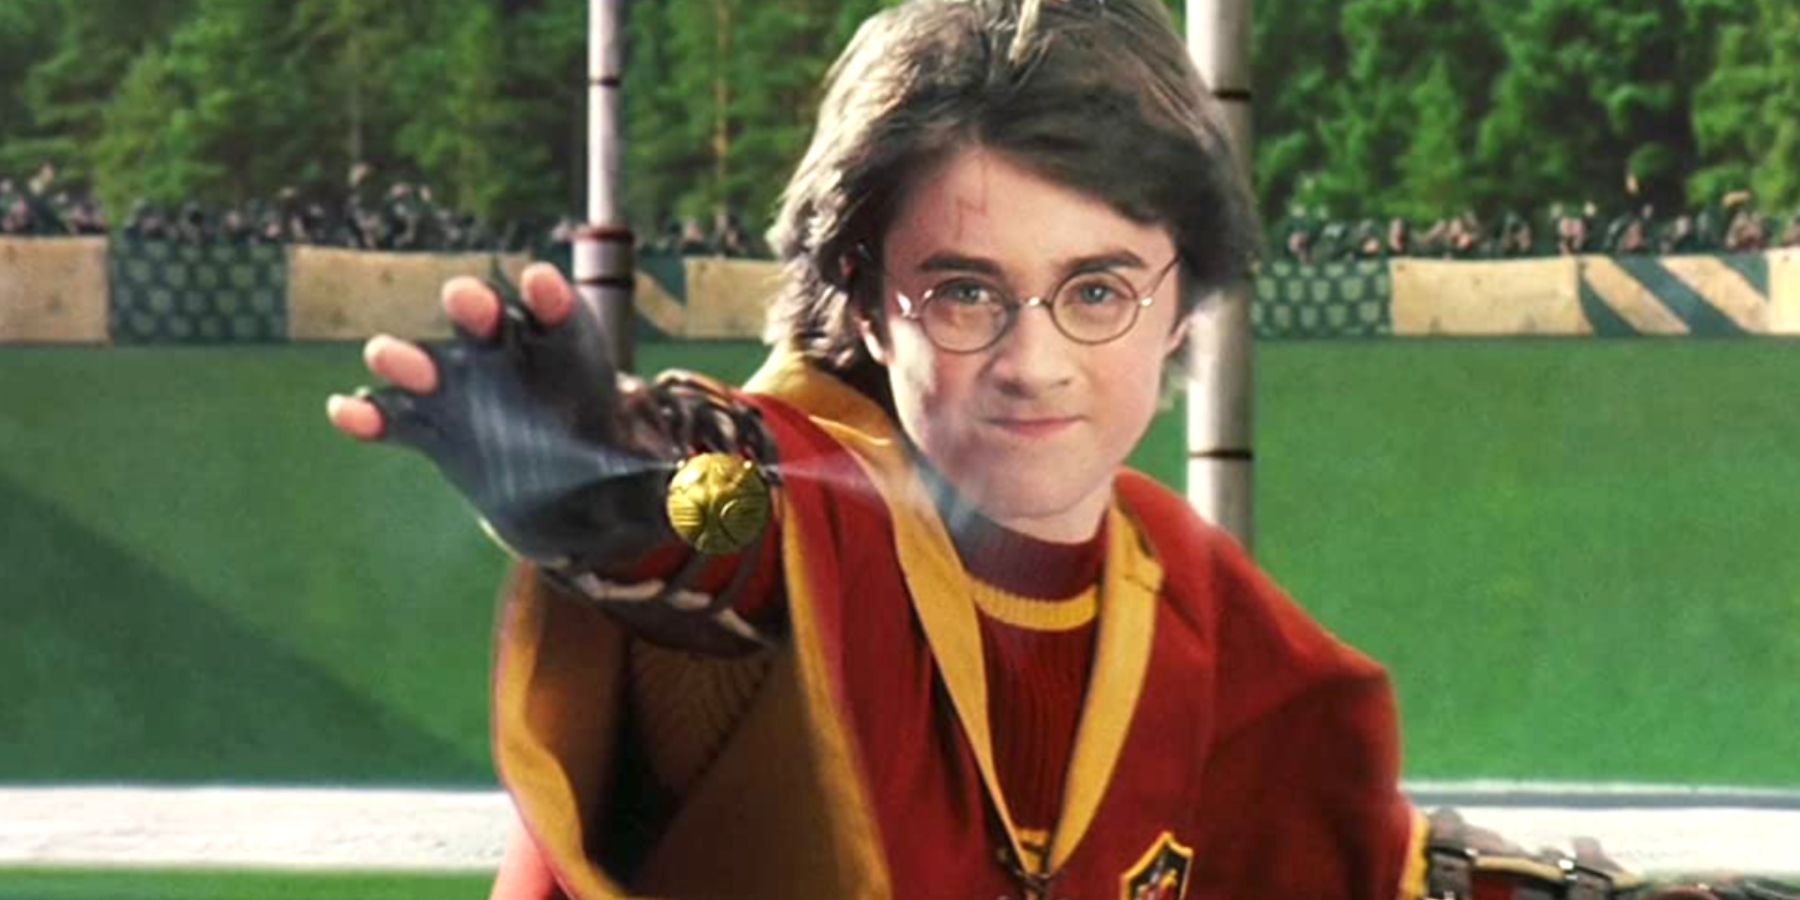 Harry Potter holding his hand up during a Quidditch game